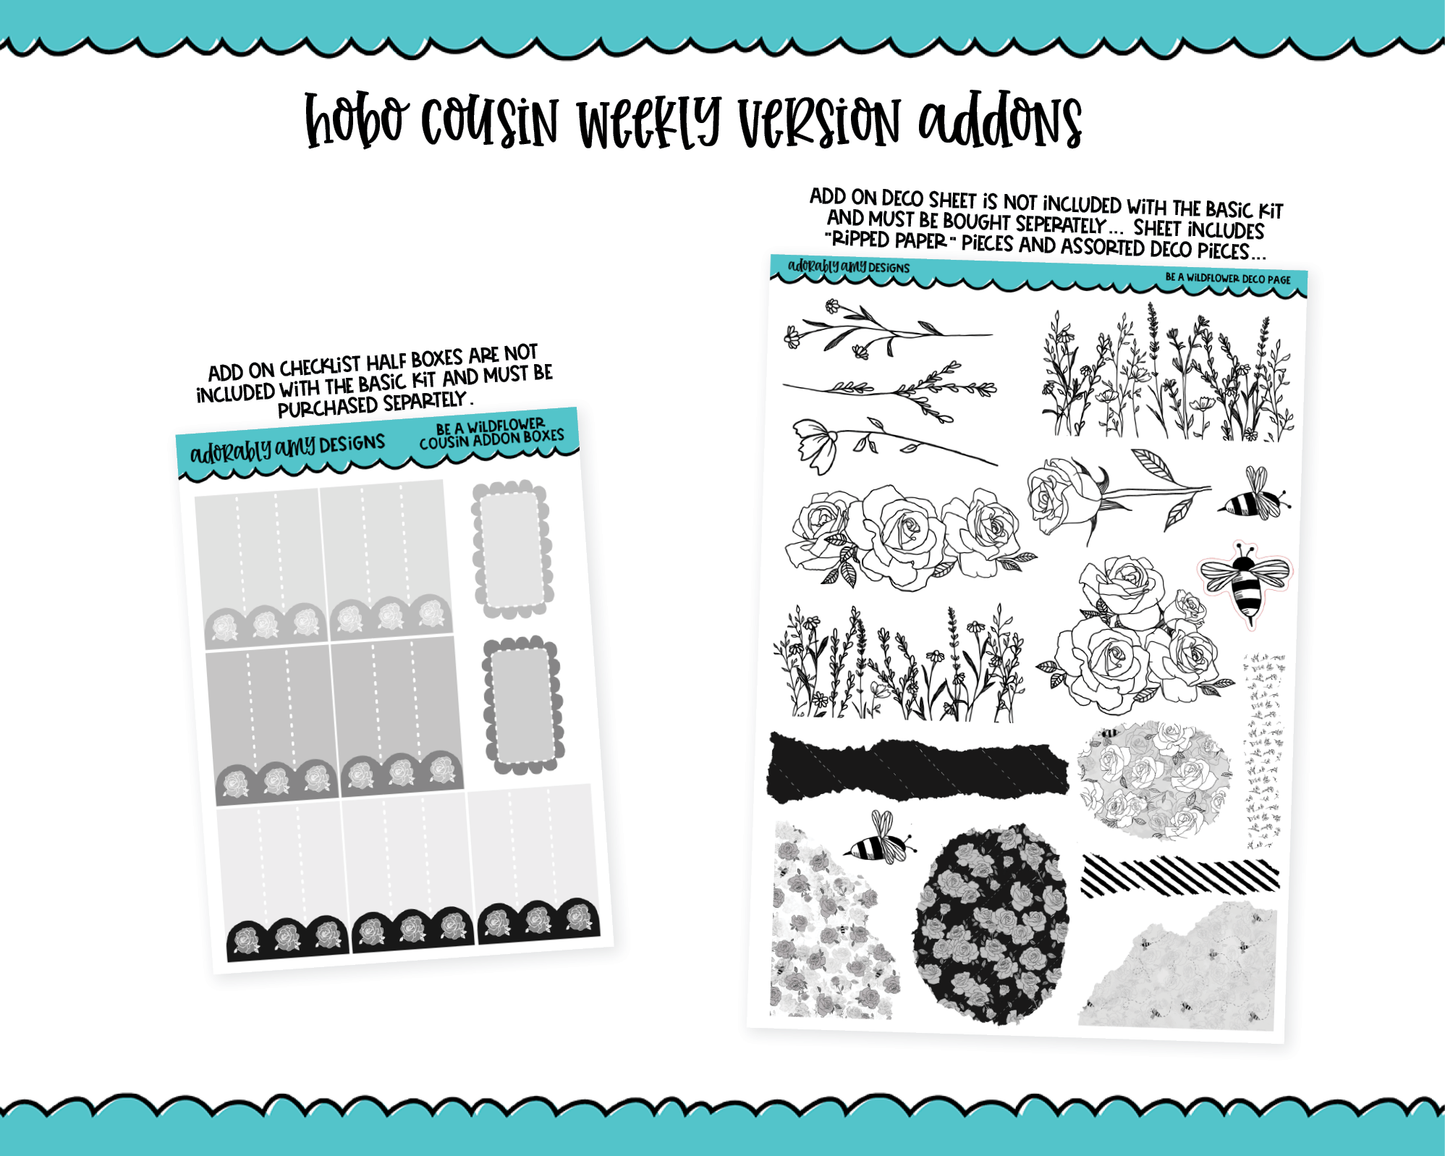 Hobonichi Cousin Weekly Be A Wildflower Planner Sticker Kit for Hobo Cousin or Similar Planners